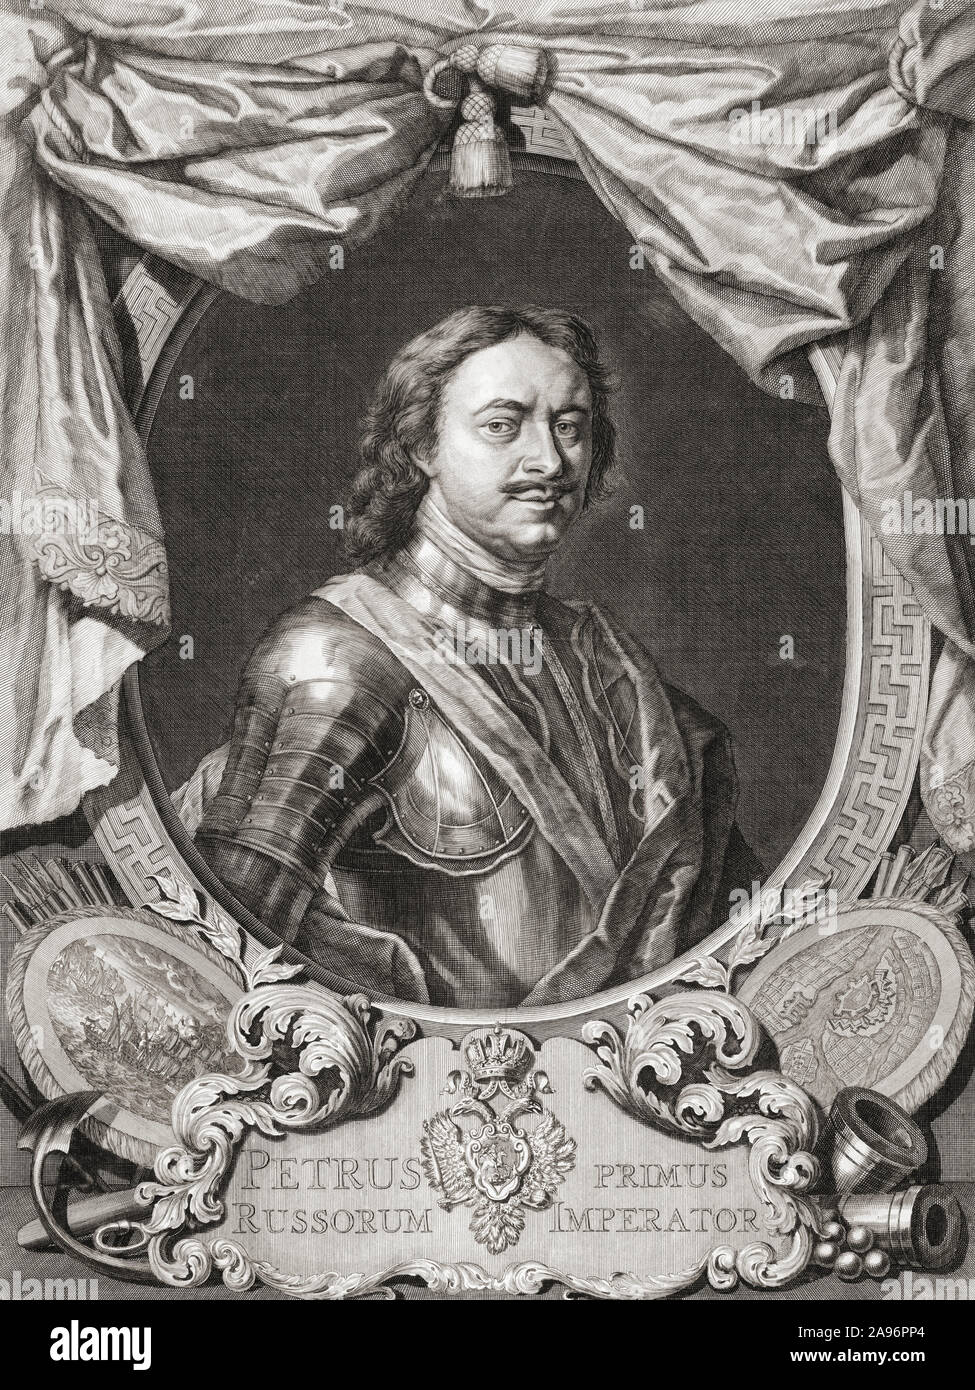 Peter the Great, Peter I or Pyotr Alexeyevich Romanov, 1672 – 1725. Tsar of Russia.  After a print by Jacob Houbraken, after a work by Carel de Moor (II). Stock Photo